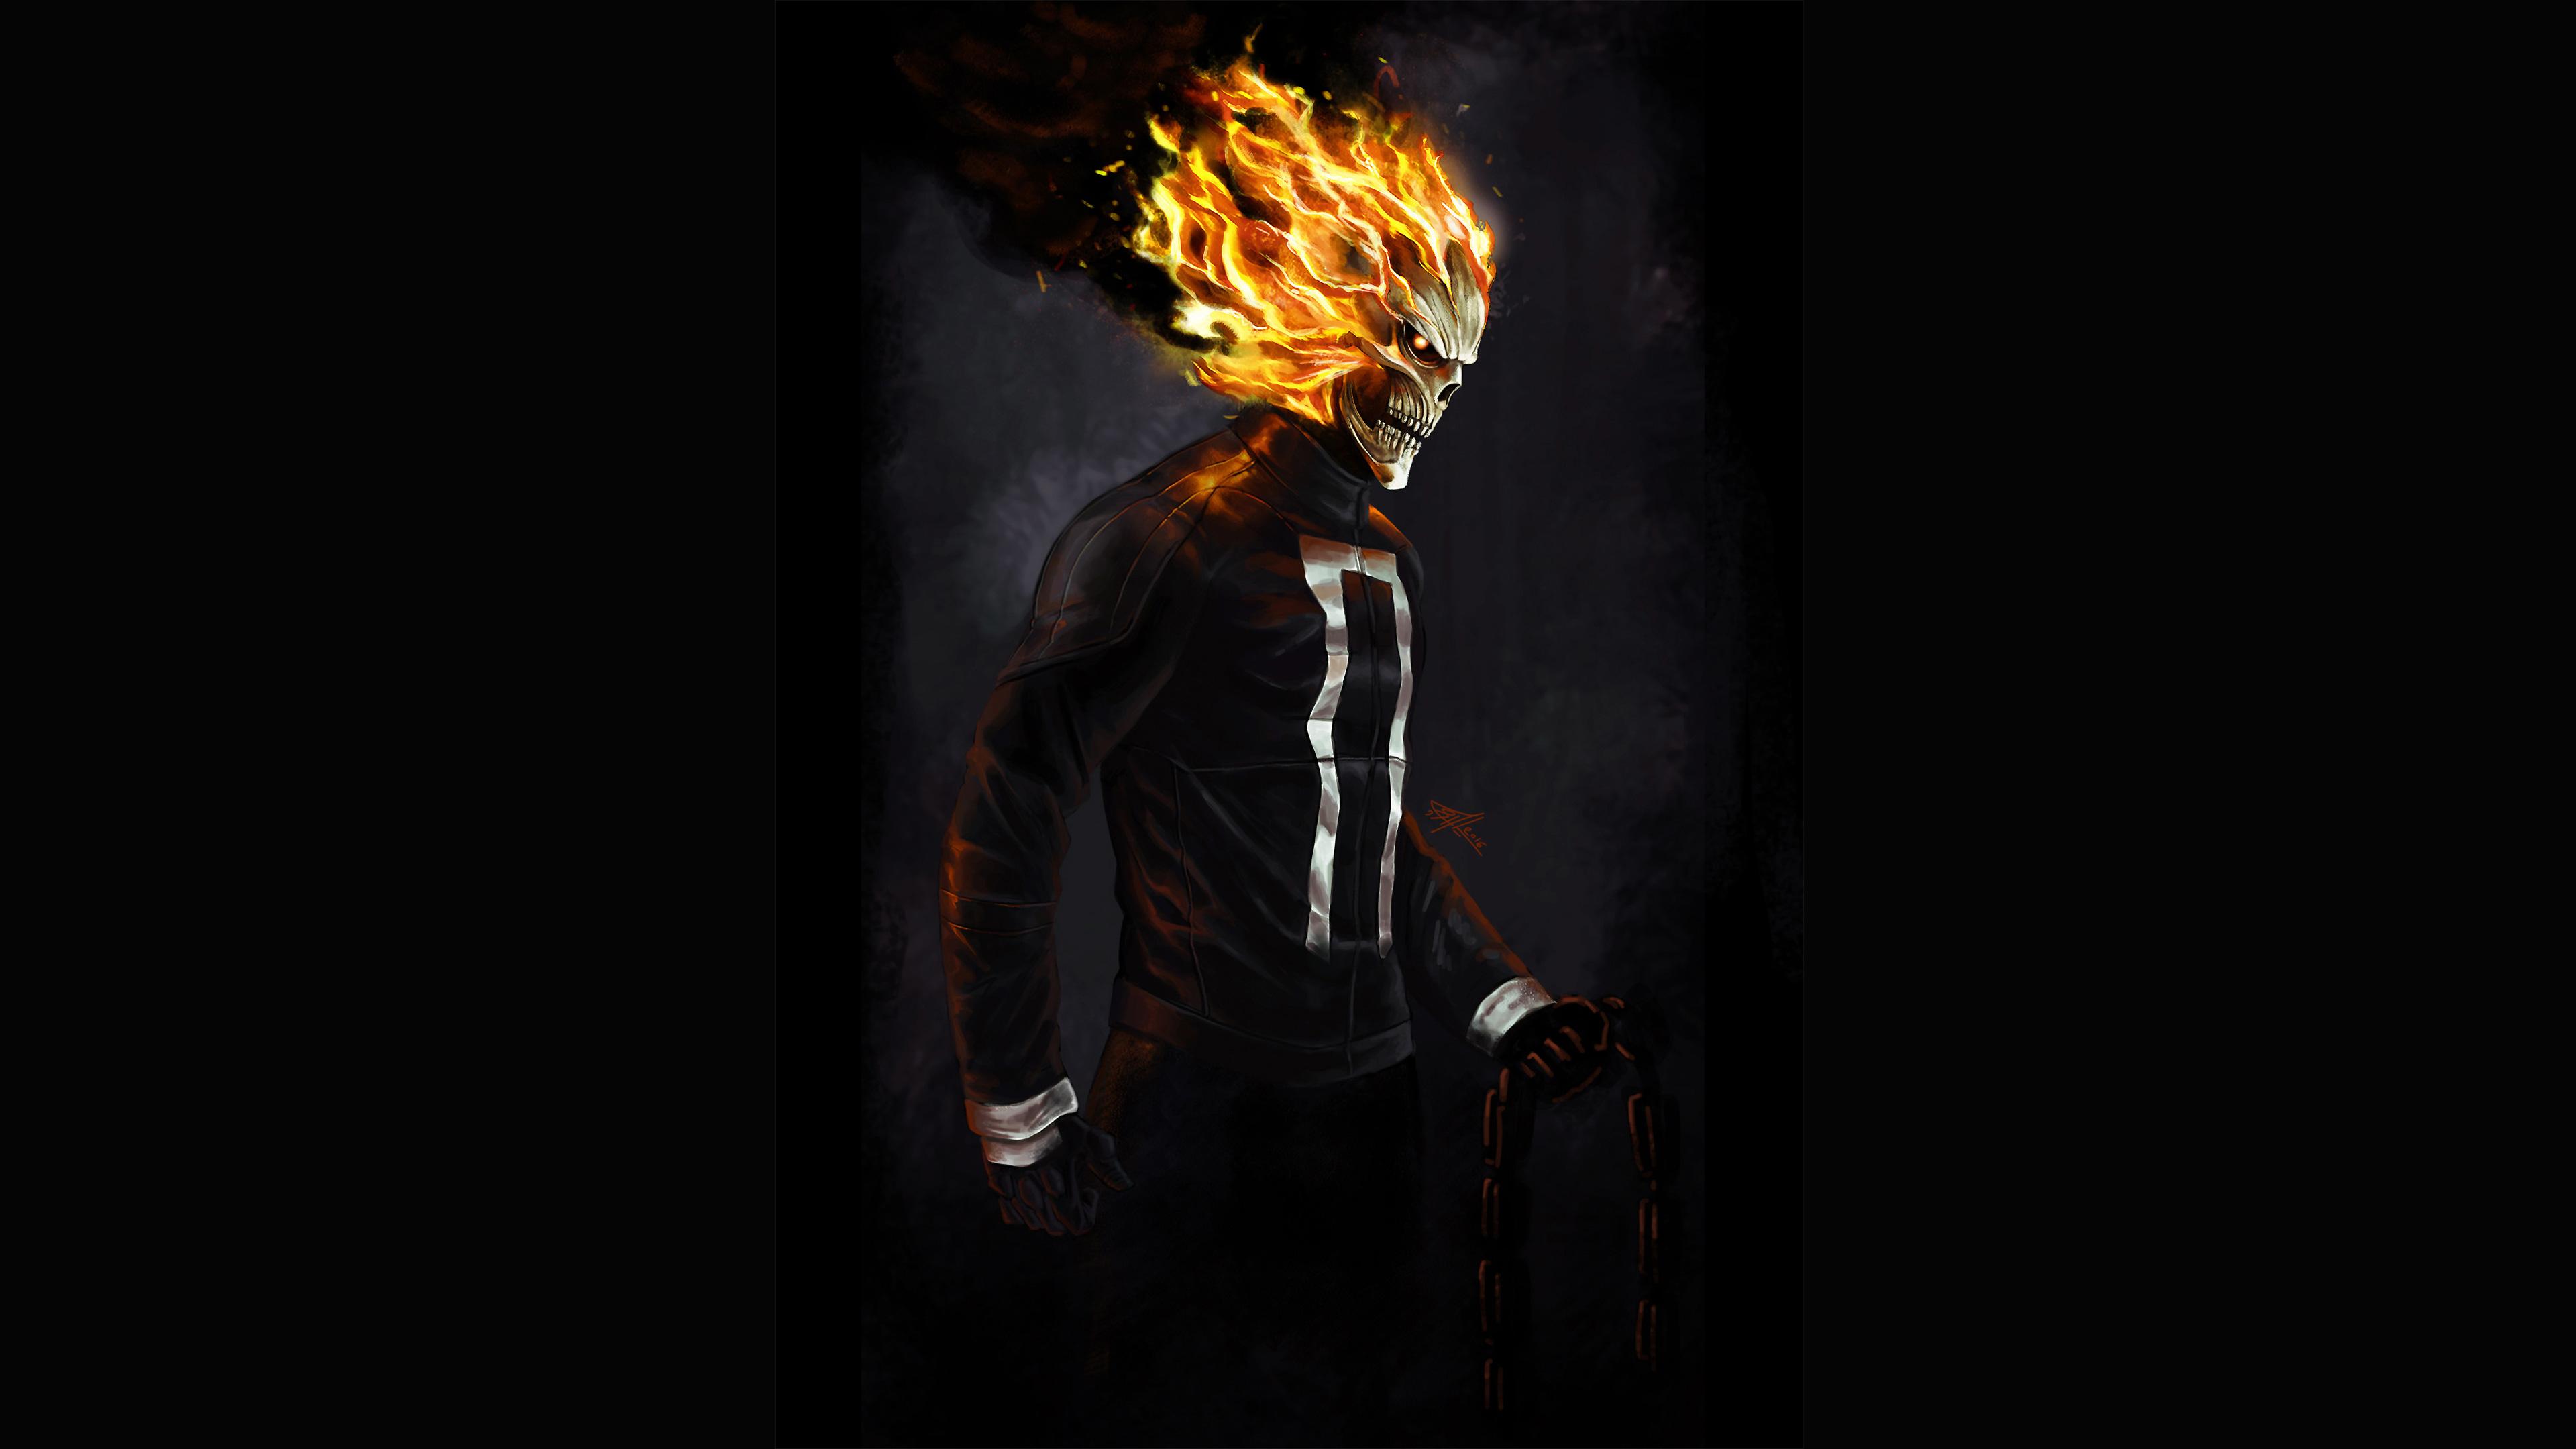 3840 x 2160 · jpeg - Ghost Rider 4k Art, HD Superheroes, 4k Wallpapers, Images, Backgrounds ...